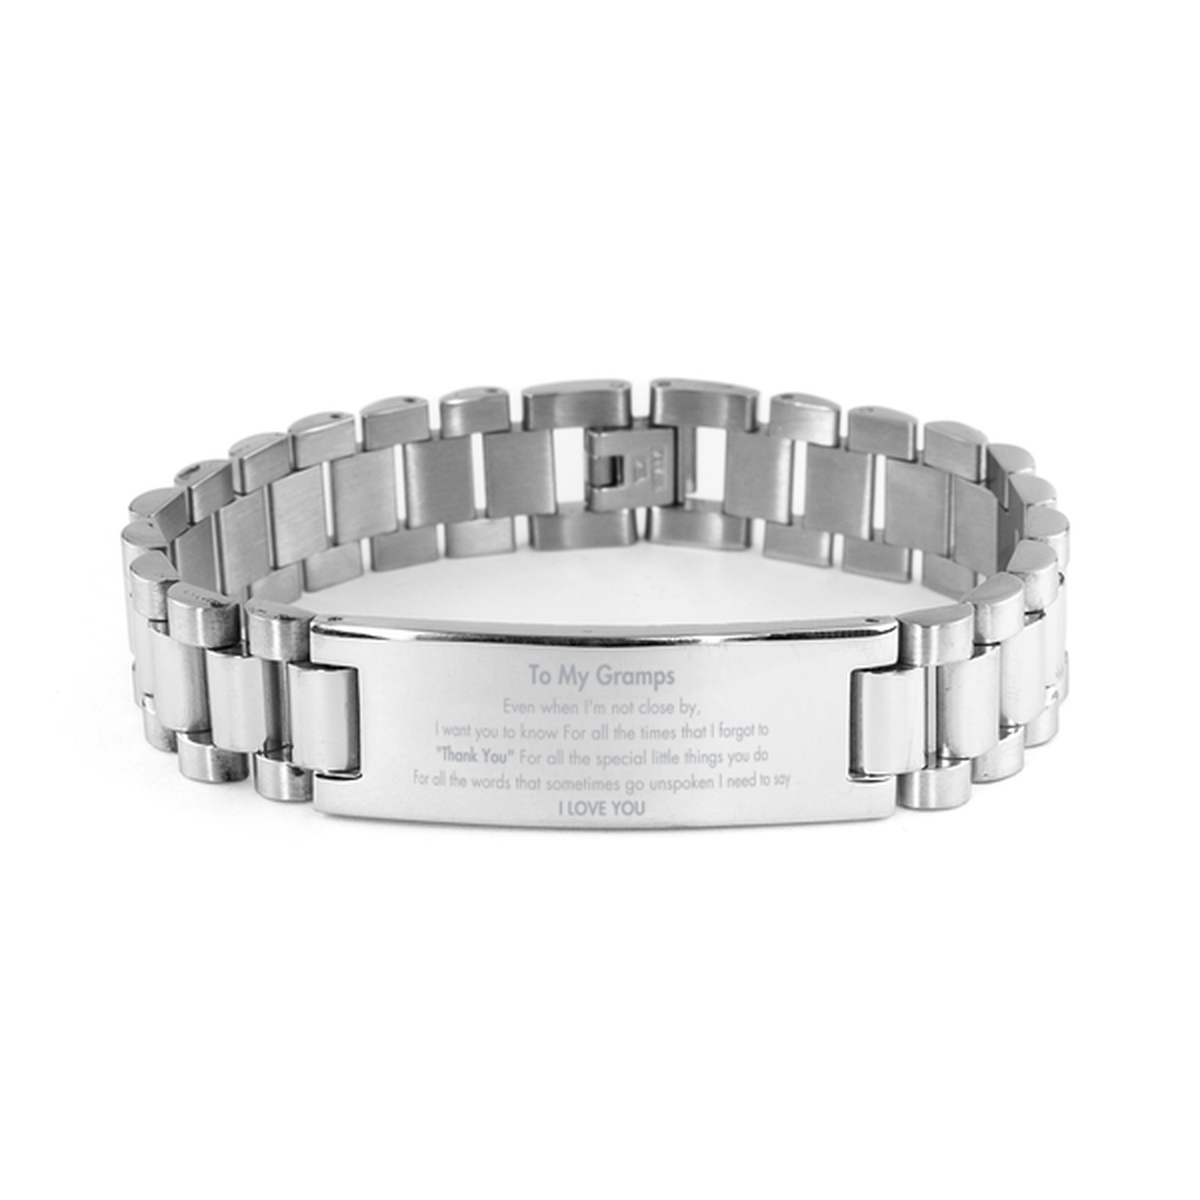 Thank You Gifts for Gramps, Keepsake Ladder Stainless Steel Bracelet Gifts for Gramps Birthday Mother's day Father's Day Gramps For all the words That sometimes go unspoken I need to say I LOVE YOU